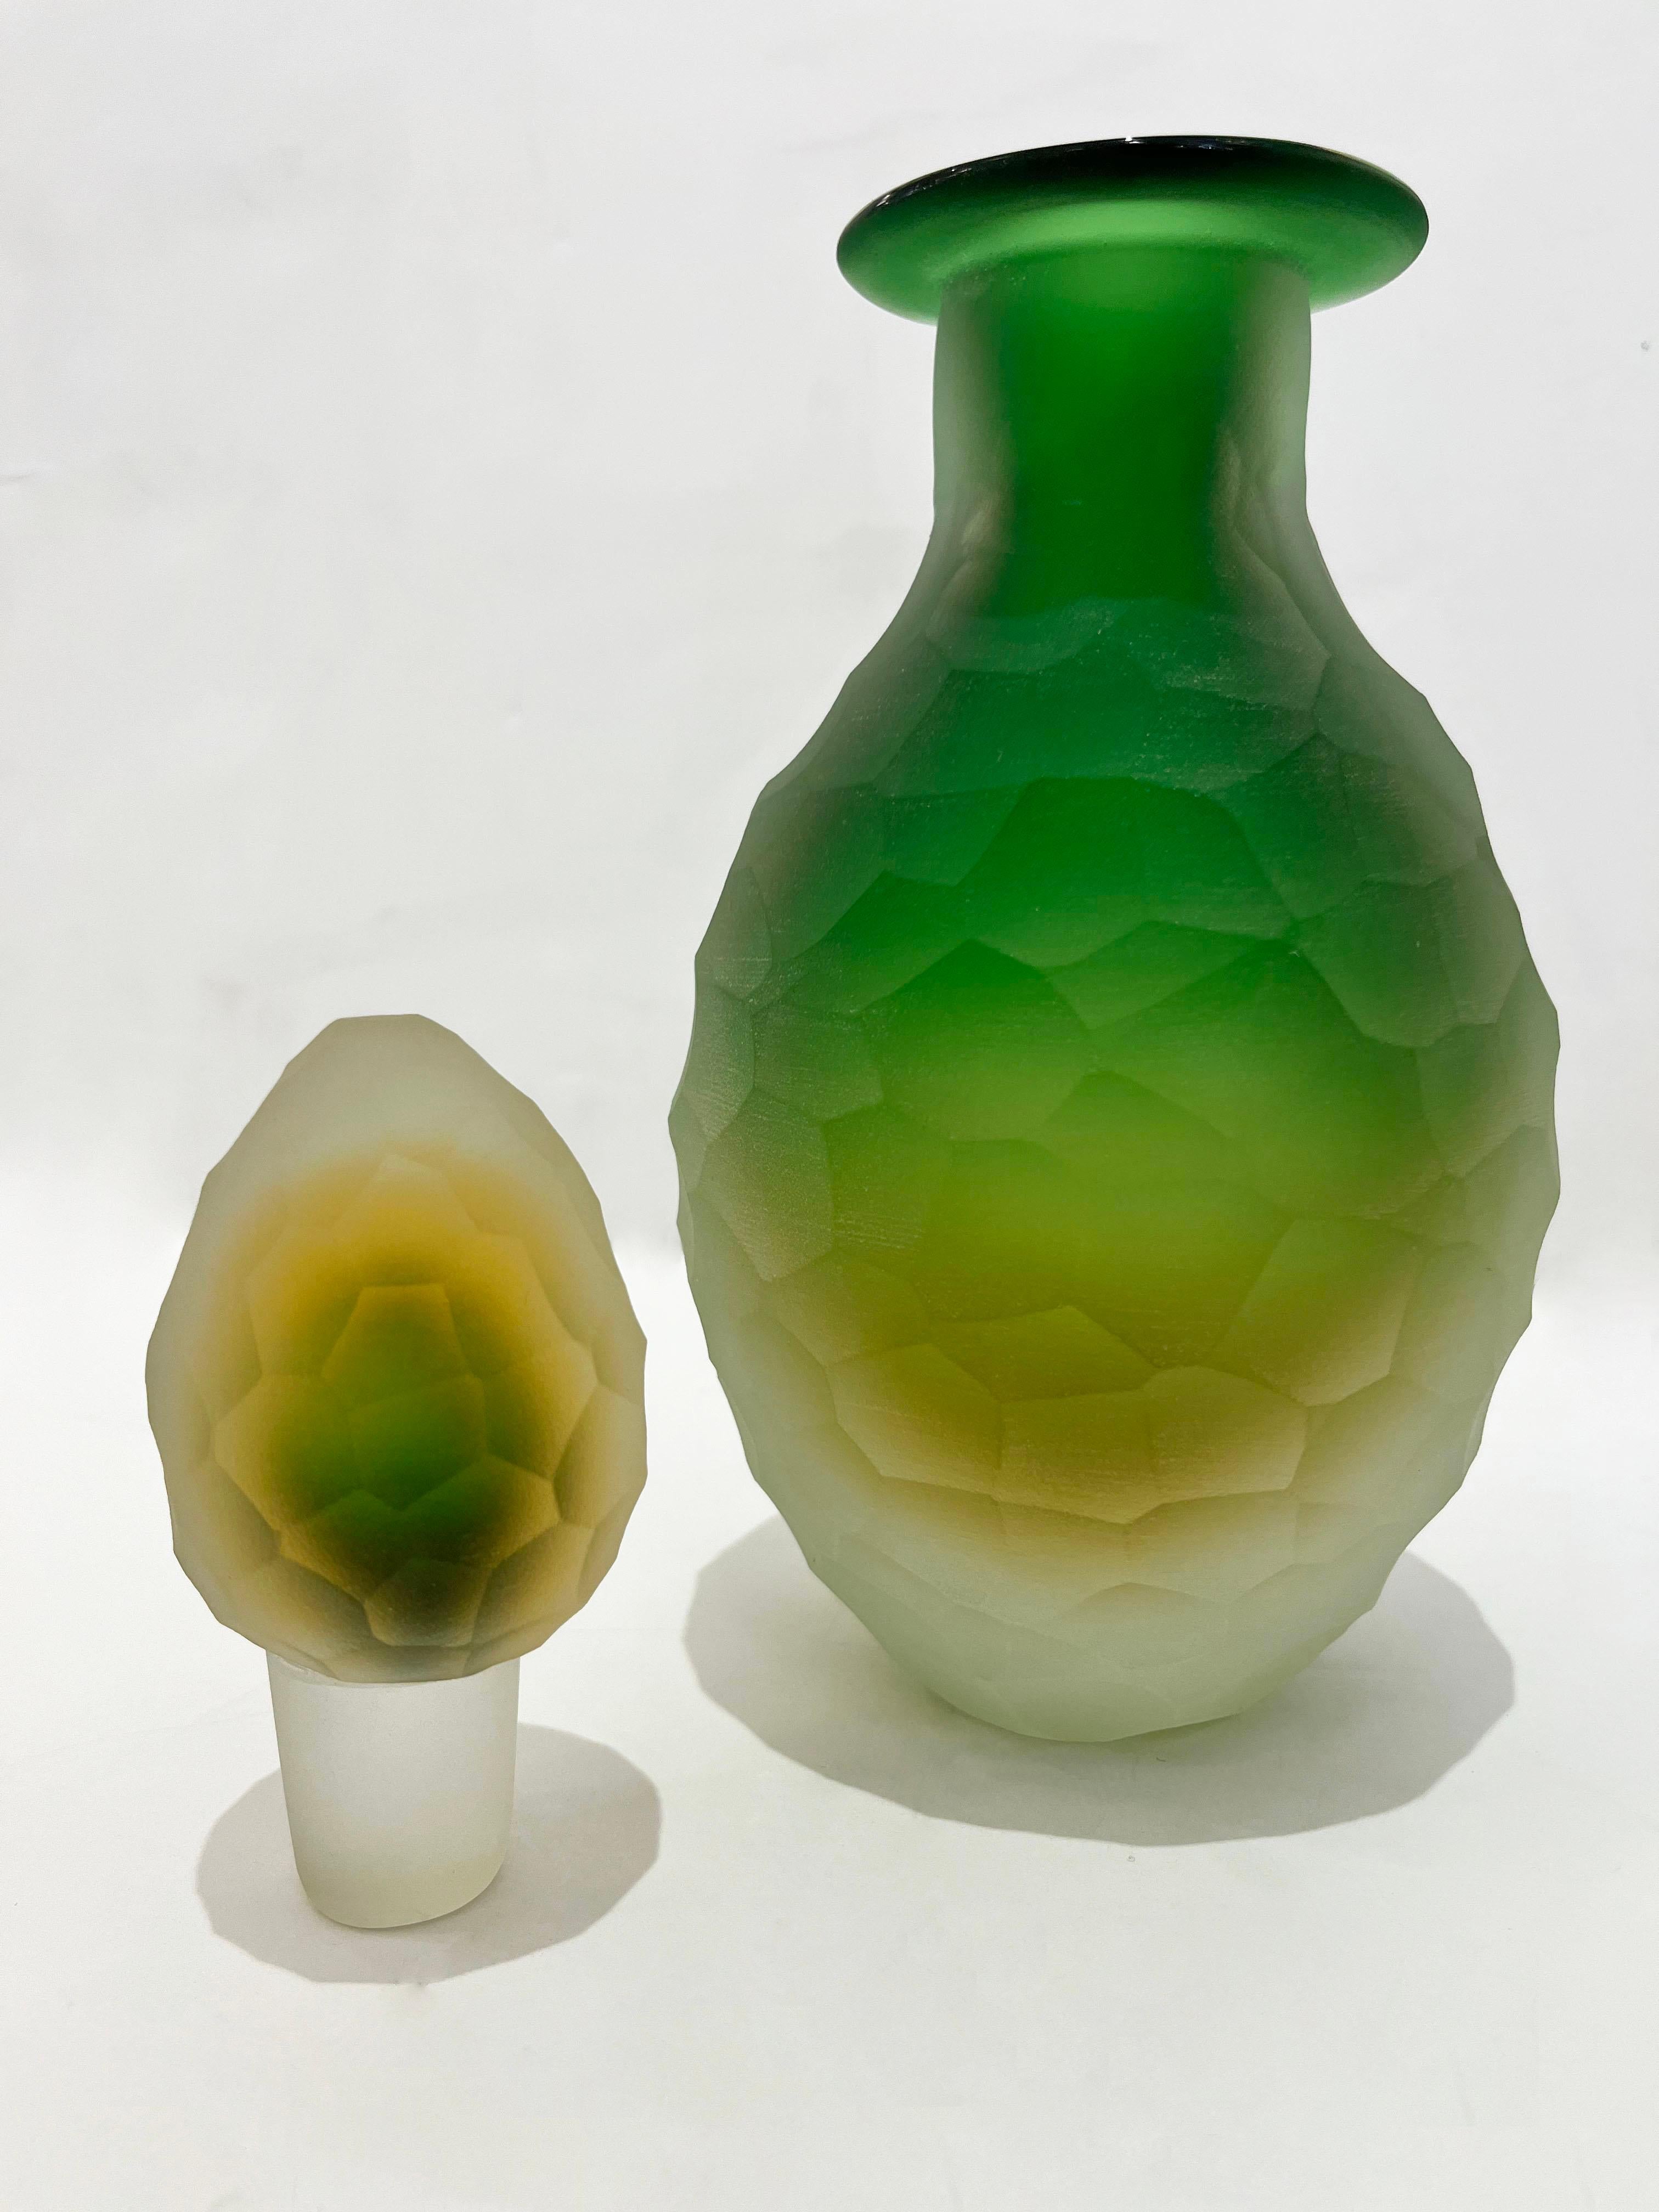 An early 1900s Art Deco Venitian bottle in Murano glass by Cristallerie Franchetti, a rare object for the size and the elegant sophisticated work with the Sommerso technique: the green central body encased in a yellow color layer, within the crystal